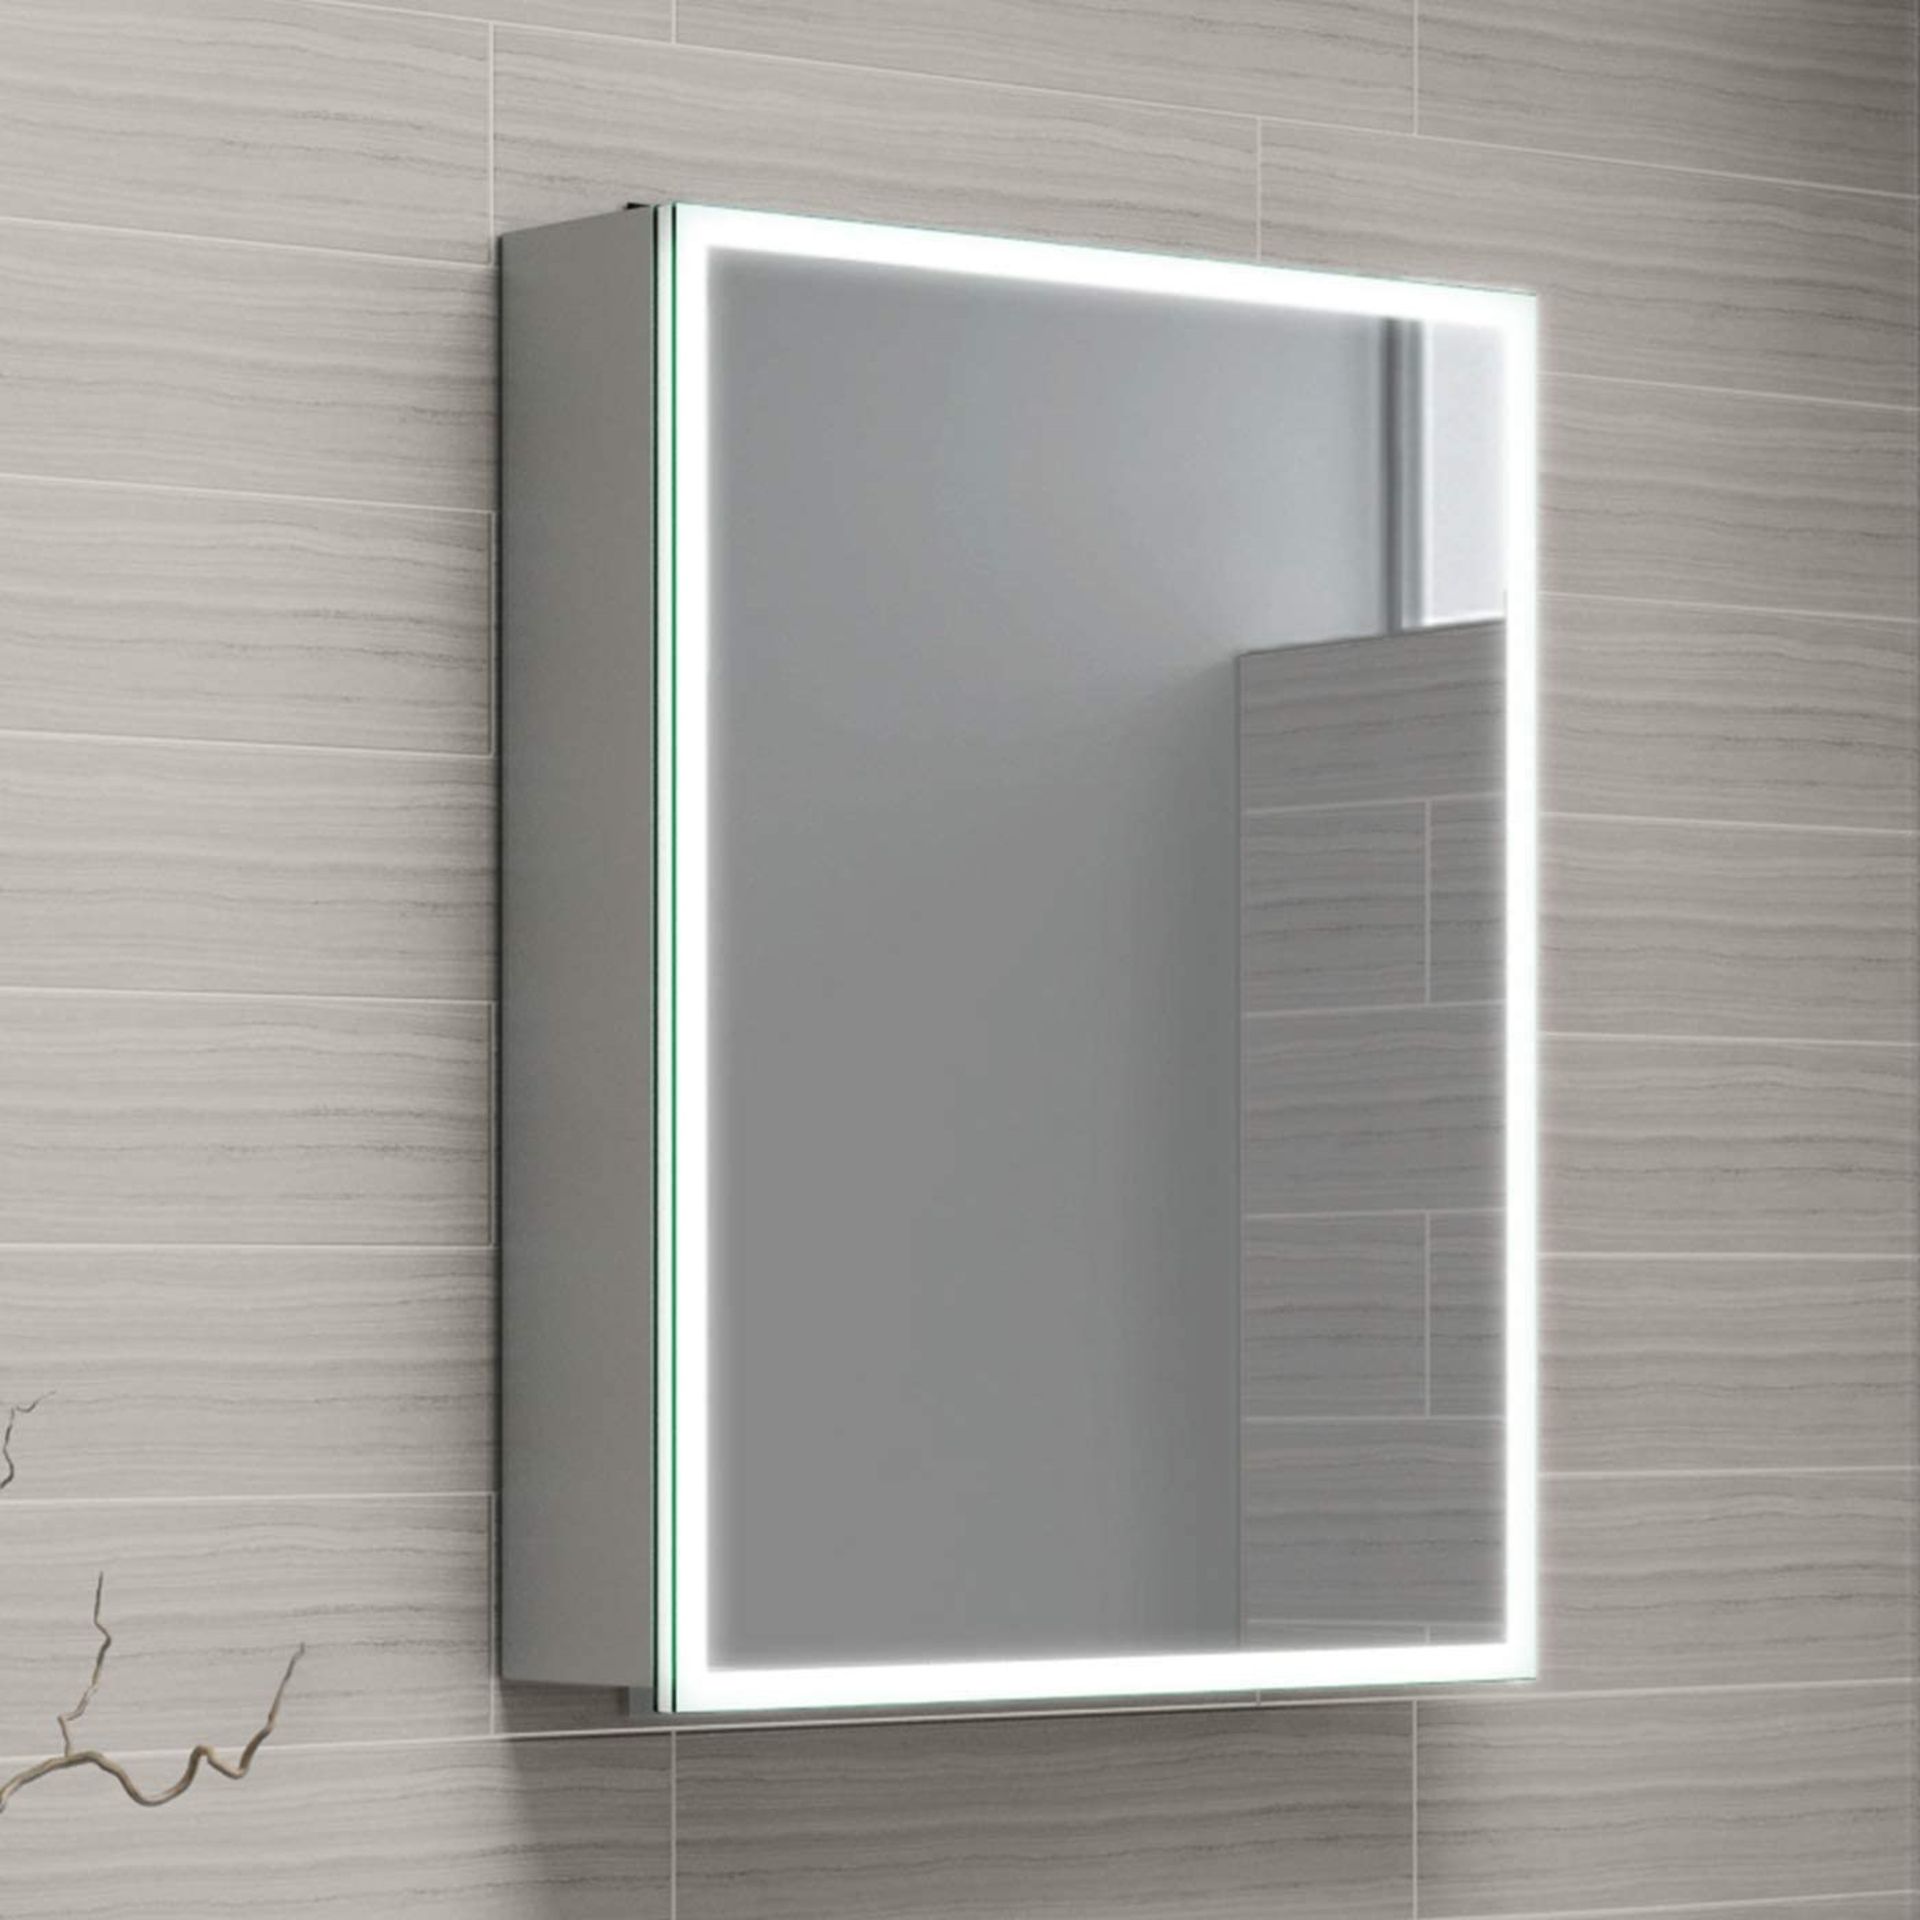 450x600 Cosmic Illuminated LED Mirror Cabinet. RRP £499.99.MC161.We love this mirror cabinet a... - Image 3 of 3